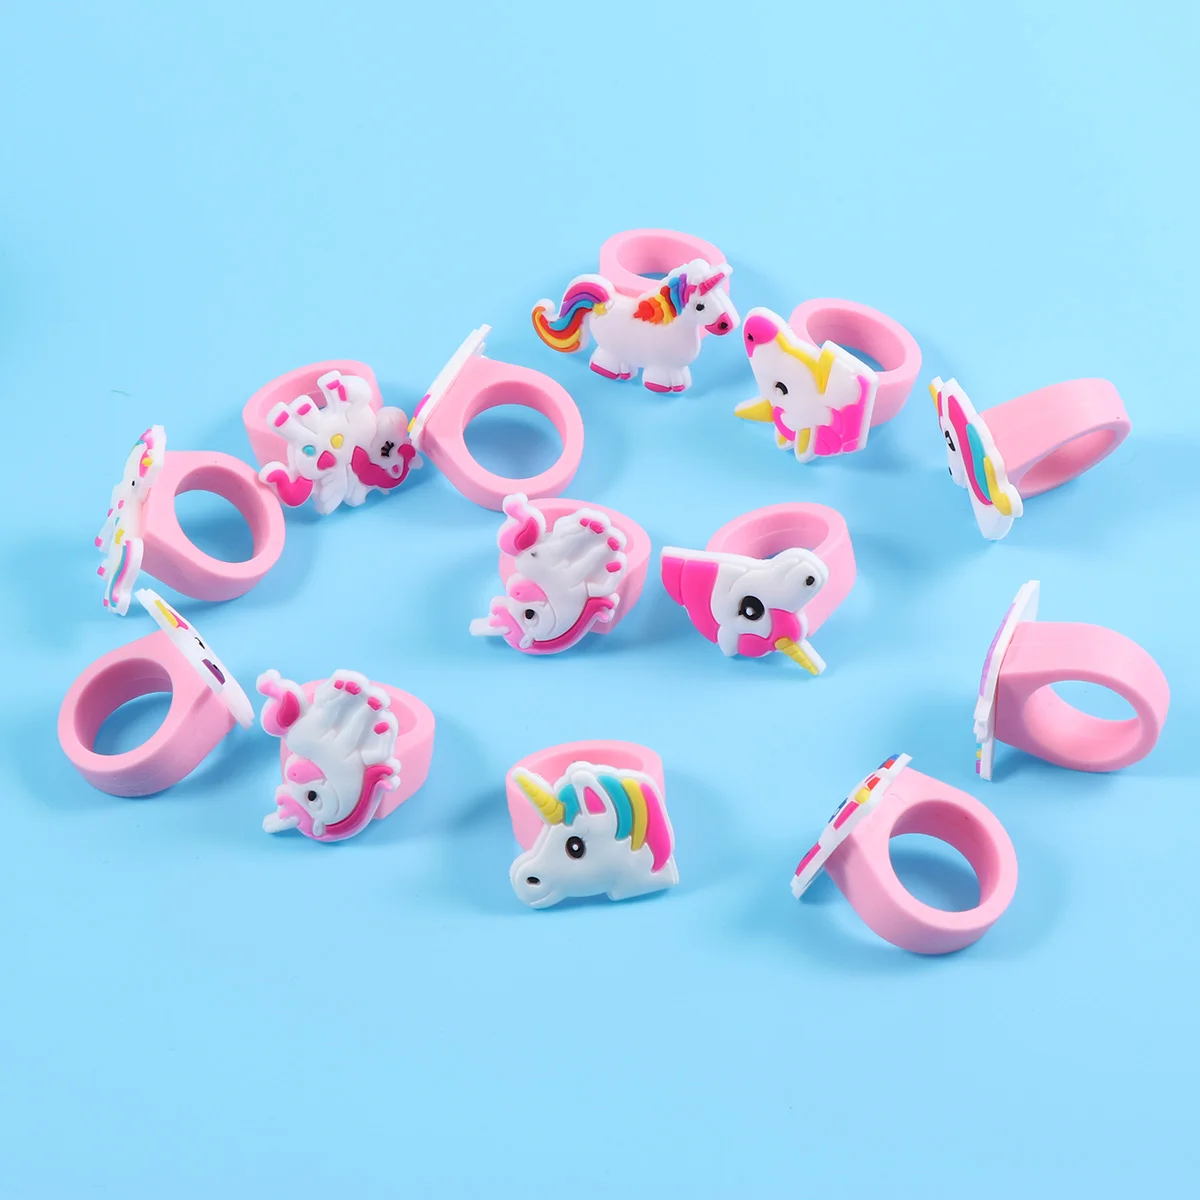 

12PCS PVC Children Rings Adorable Unicorn Shape Rings Decorative Jewelry Birthday Party Favors Gifts for Kids